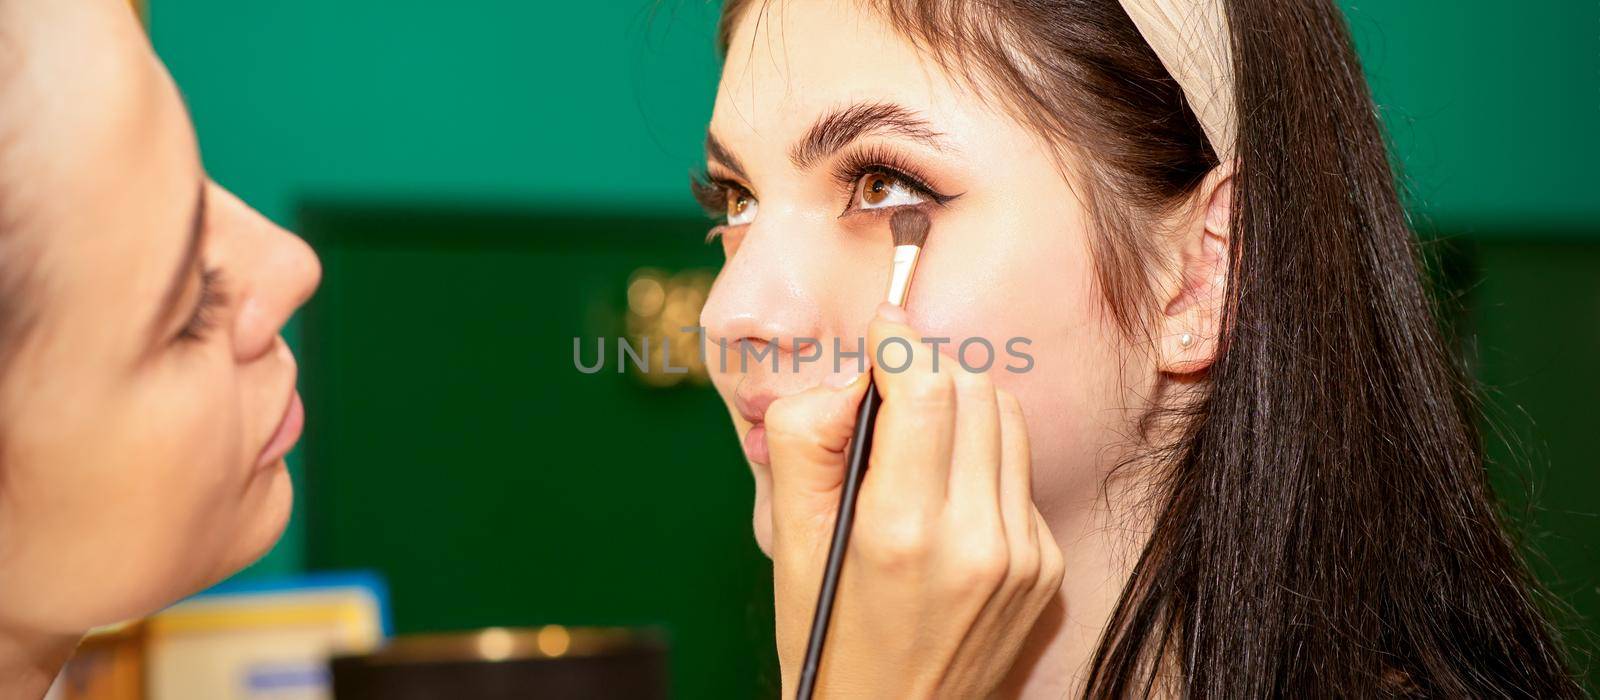 Make-up in the process. The hand of the makeup artist applies eye shadow under the eyes of a young beautiful caucasian model woman. by okskukuruza